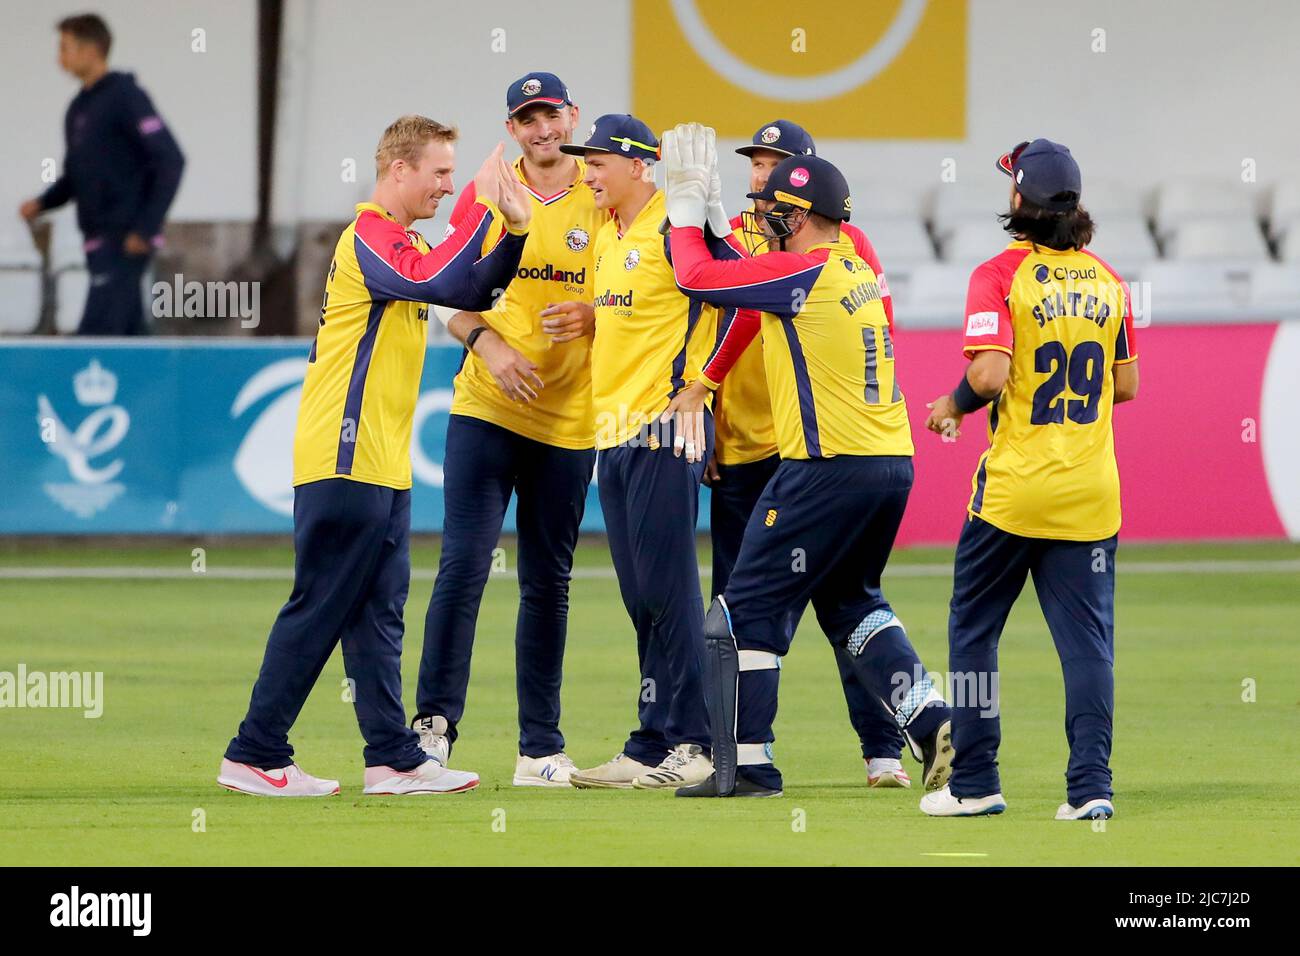 Simon Harmer of Essex celebrates with his team mates after taking the wicket of John Simpson during Essex Eagles vs Middlesex, Vitality Blast T20 Cric Stock Photo